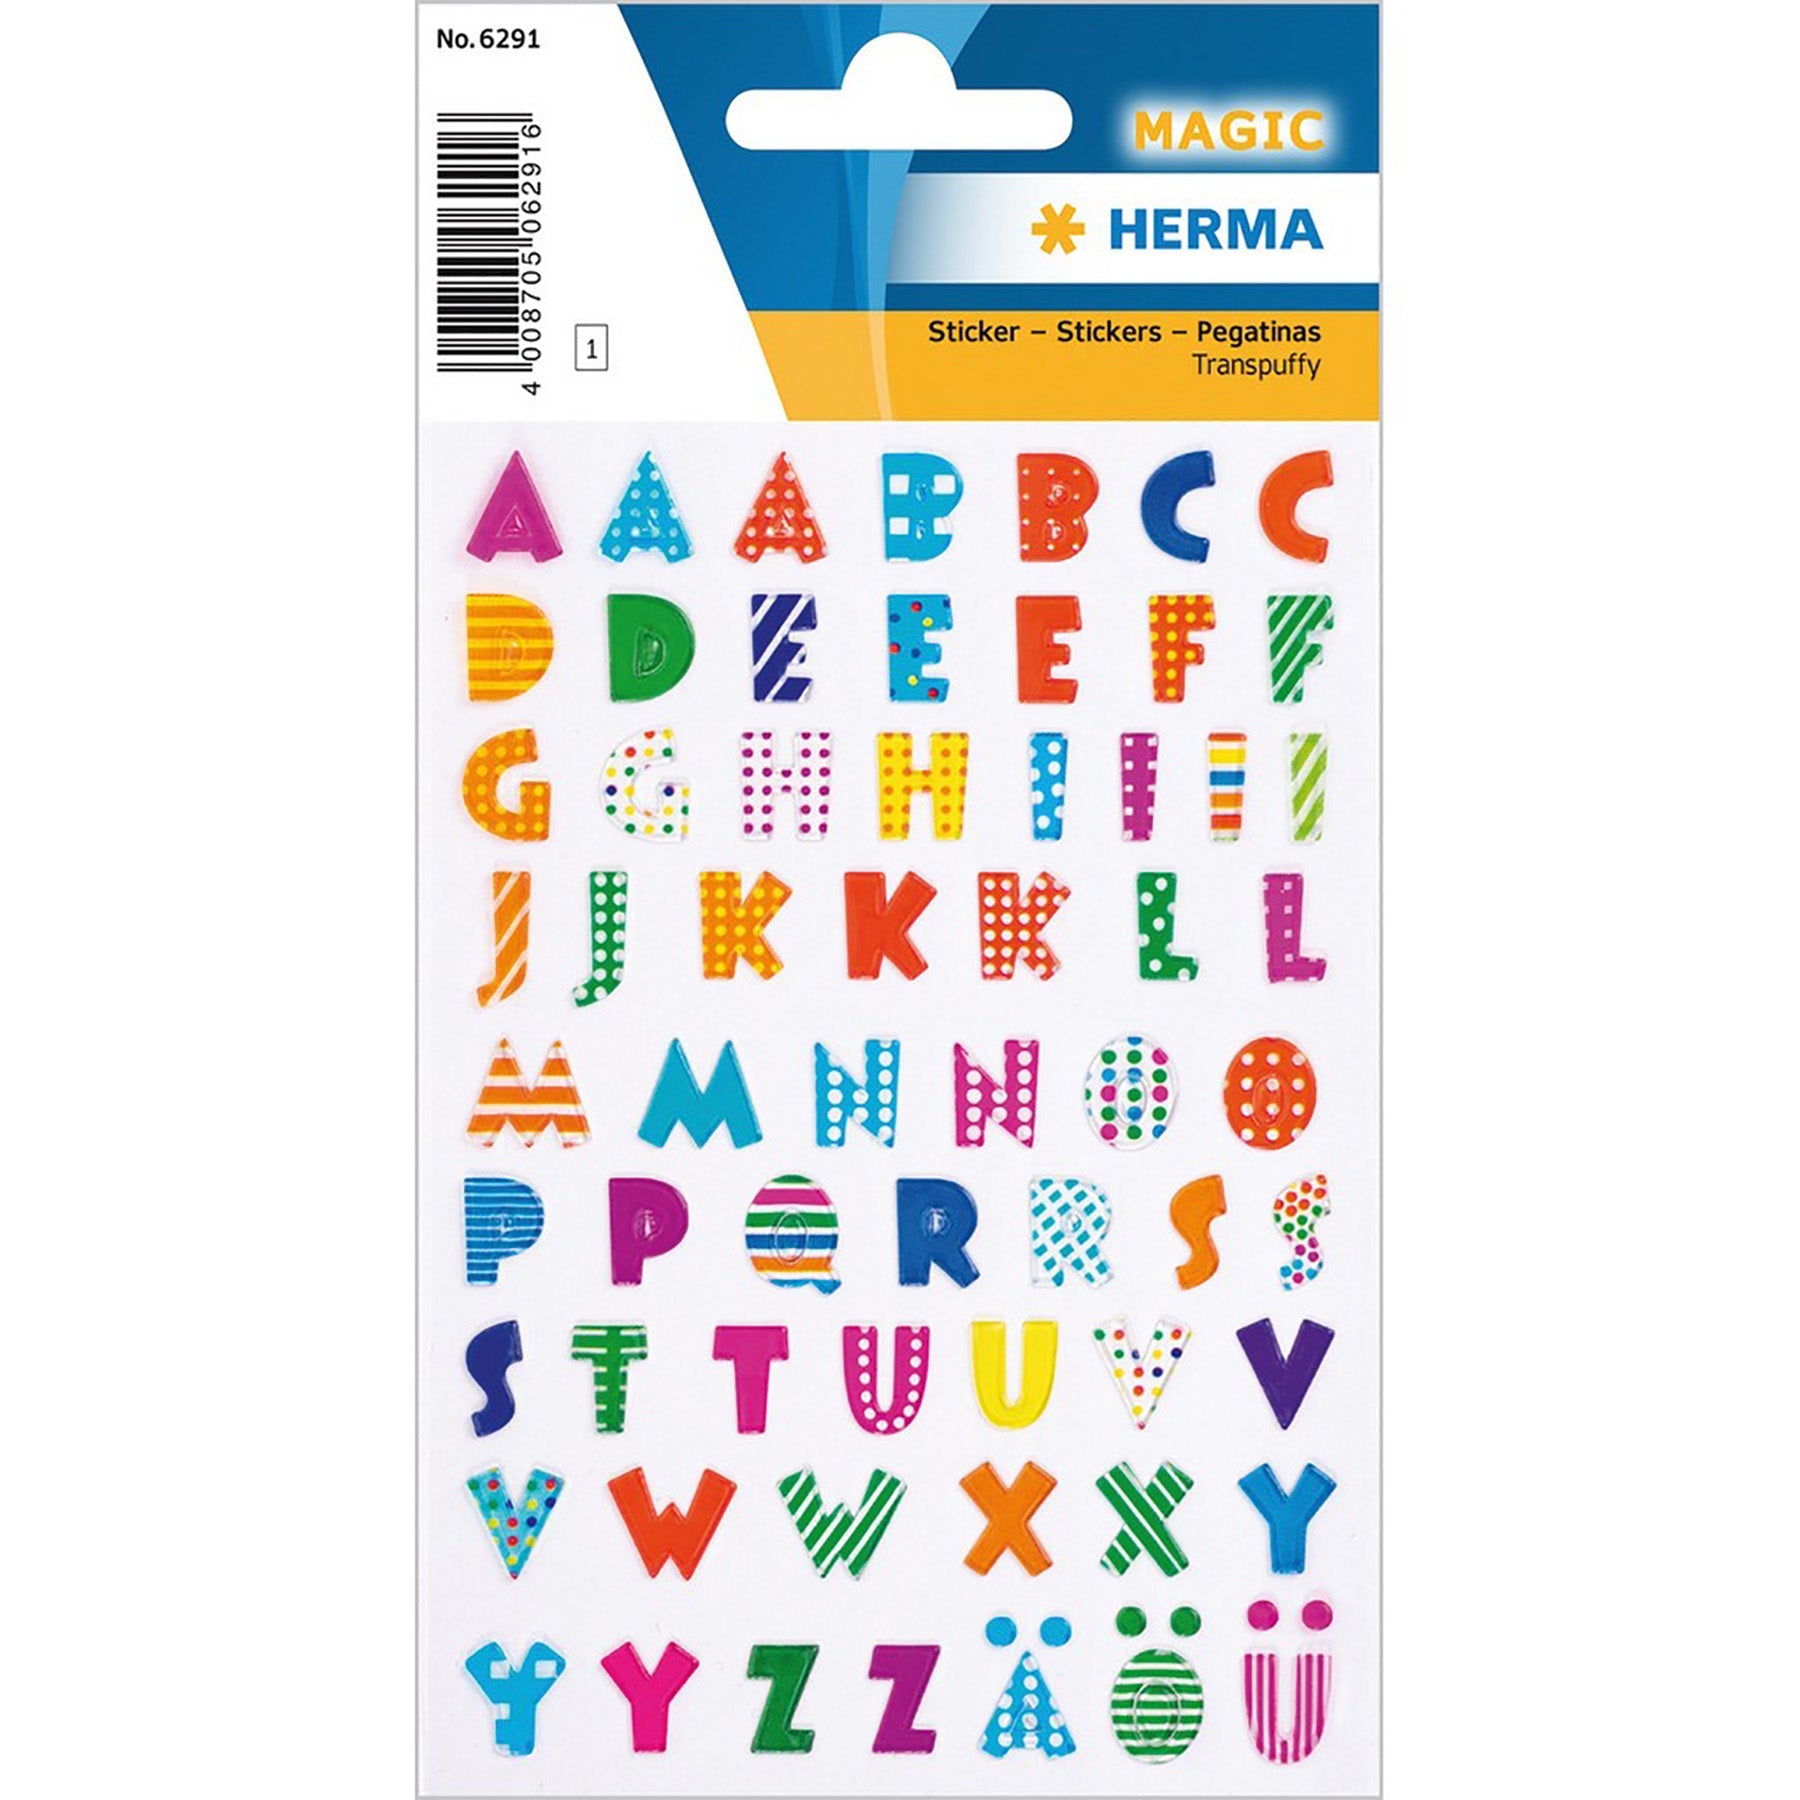 Herma Magic Stickers Letters  3D Crystal 4.75x3.1in Sheet